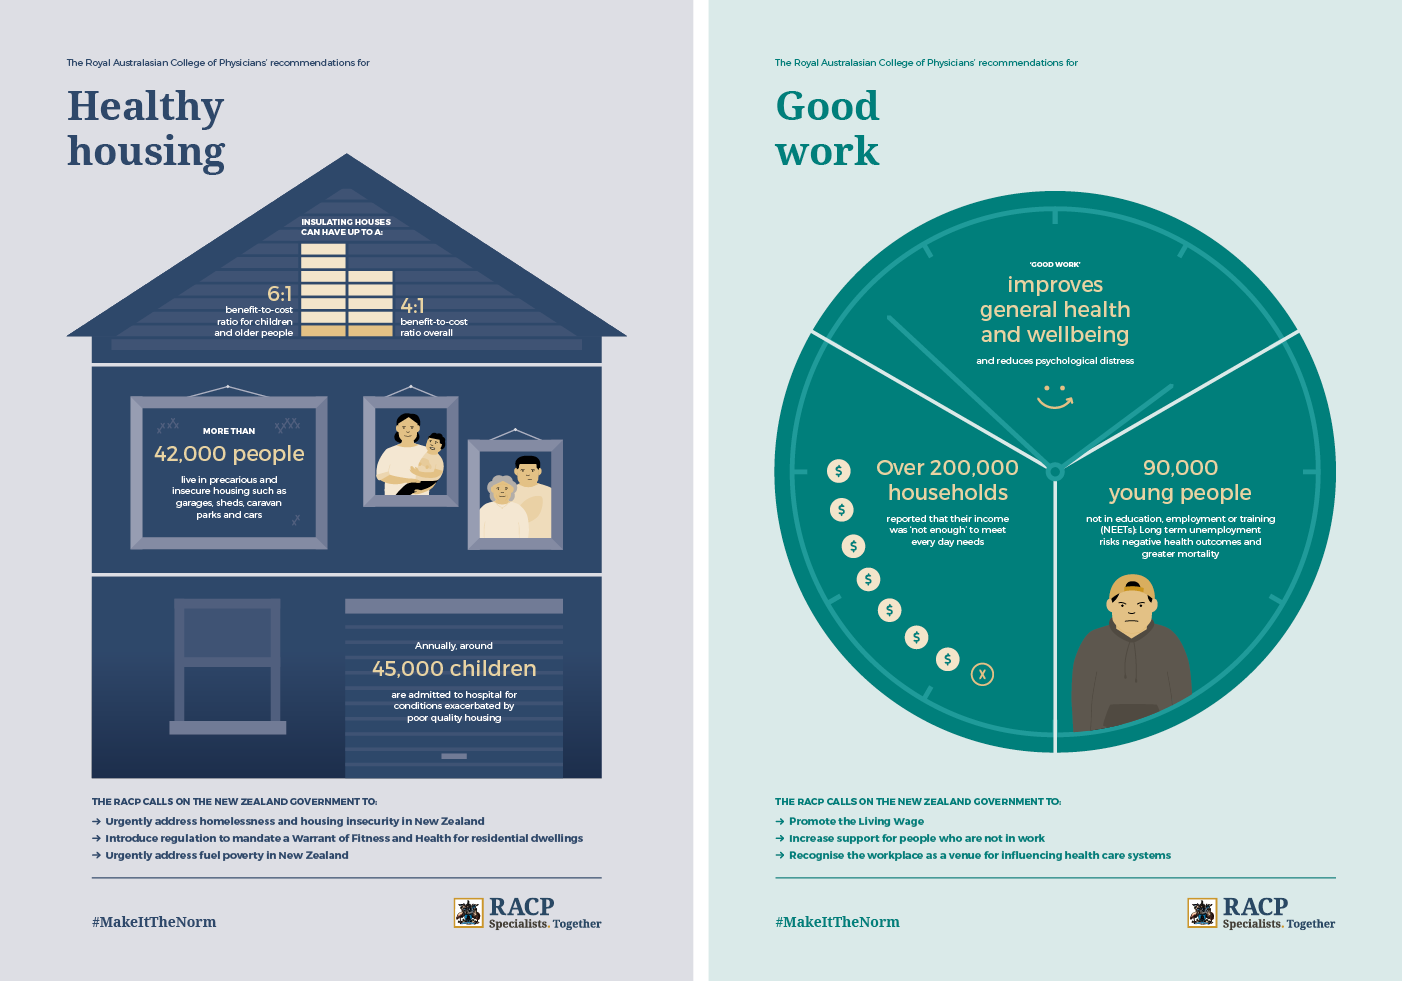 Campaign posters that show the College's recommendations for healthy housing and good work